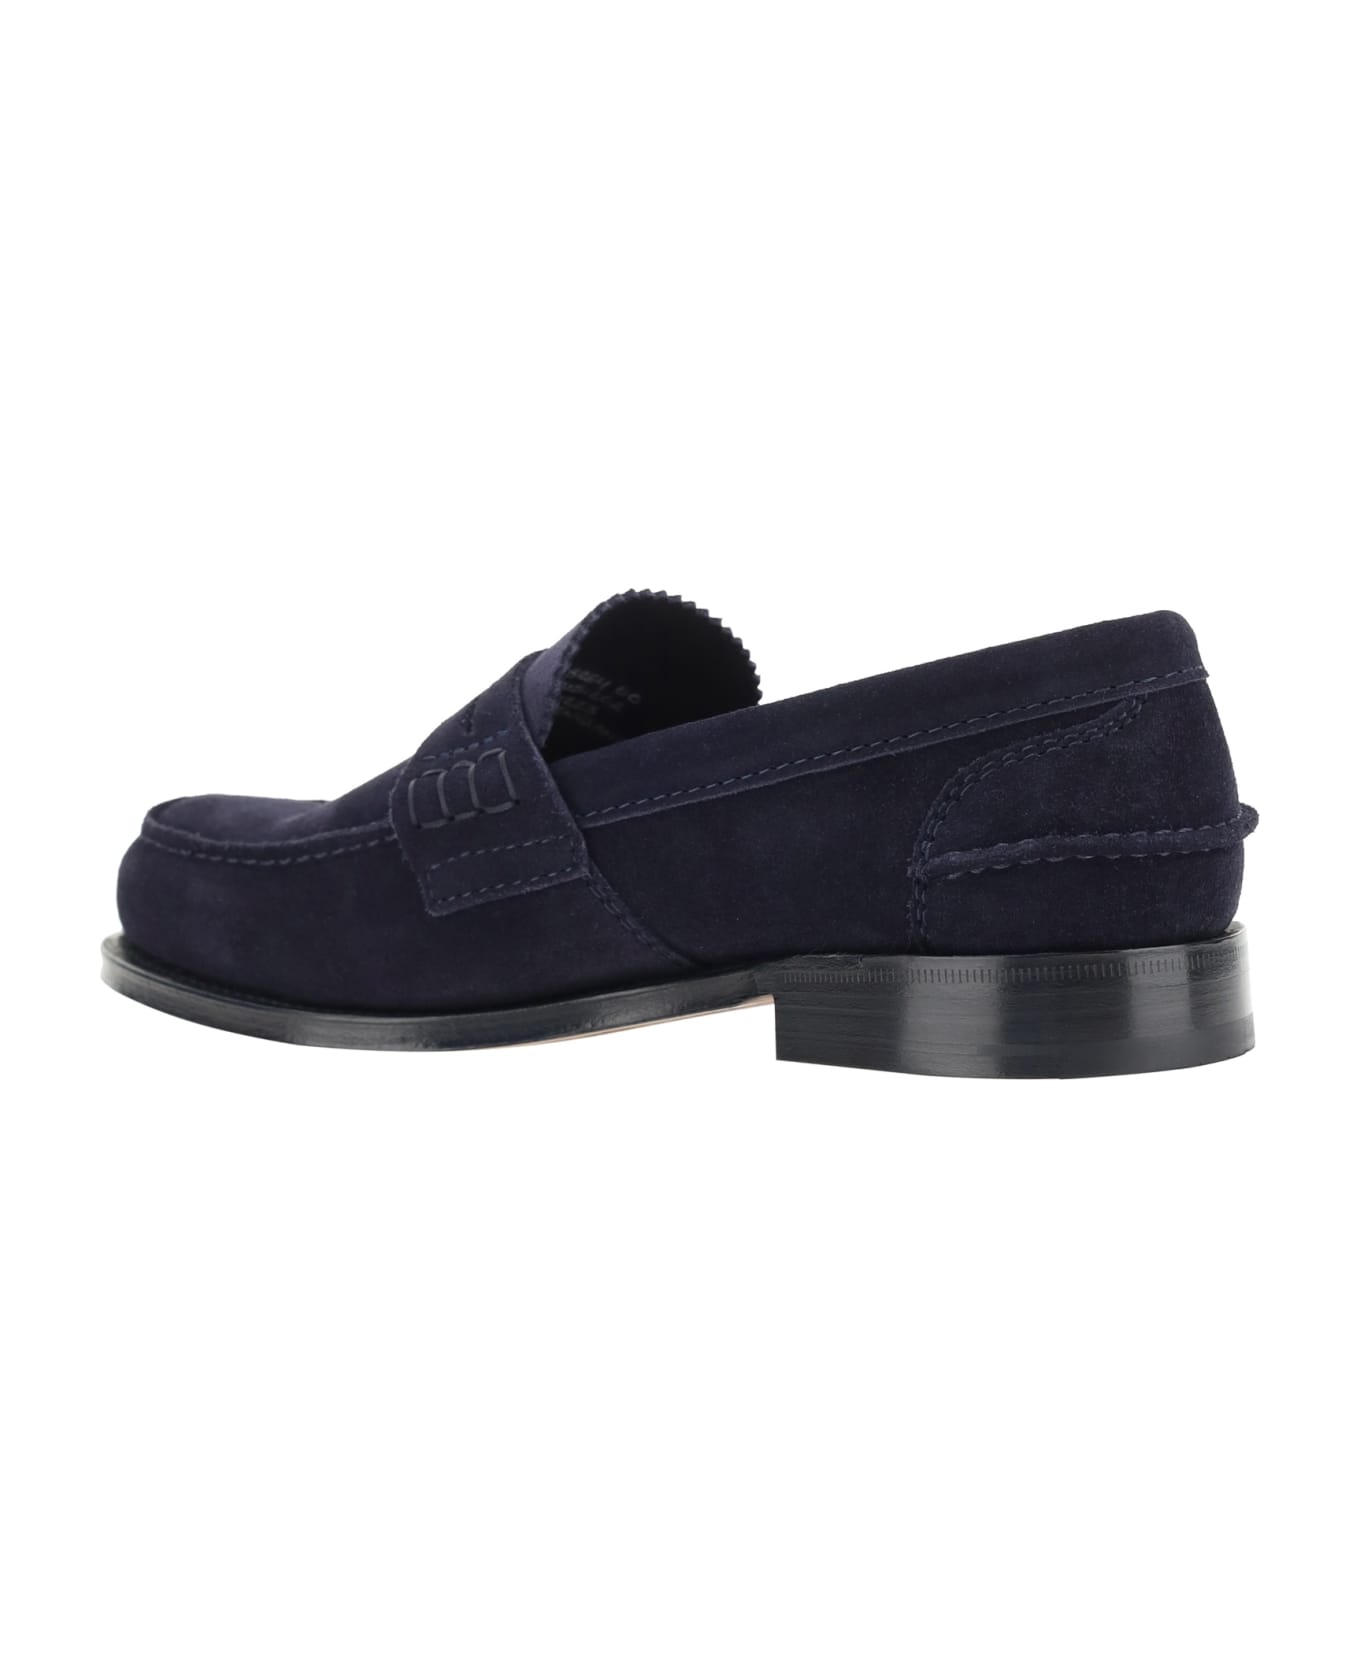 Church's Loafers - Navy